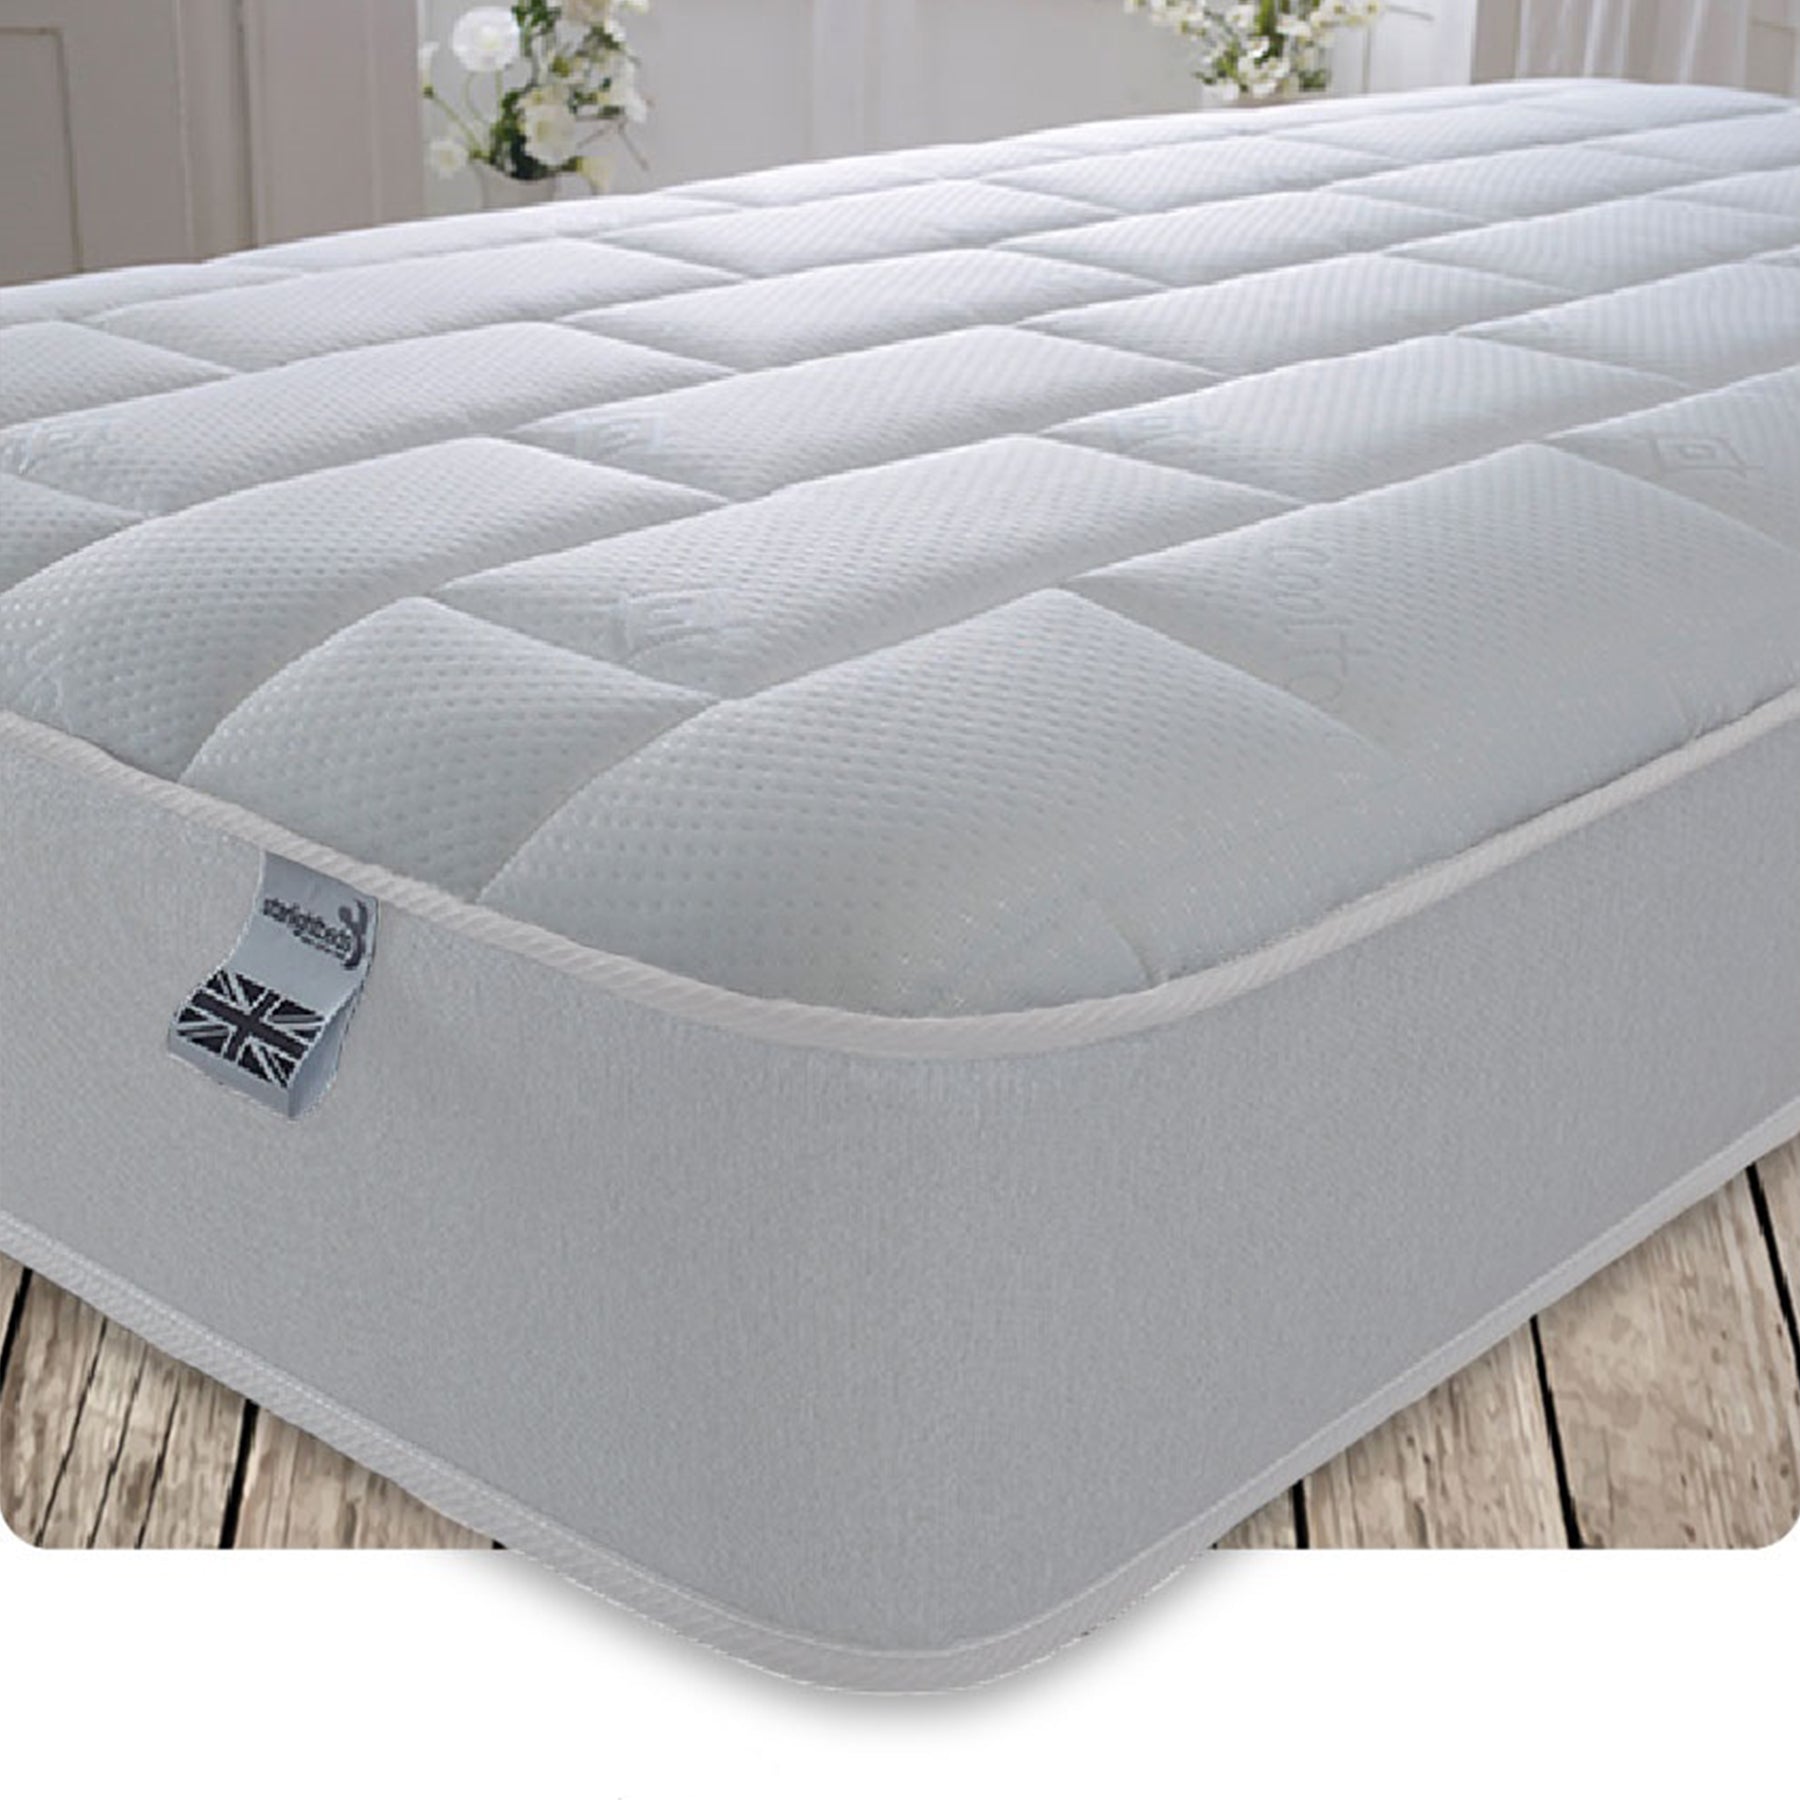 Starlight Beds 7.25" Deep Luxurious Cool Touch Big Bricks Quilting White Border with Memory Foam and Spring Mattress